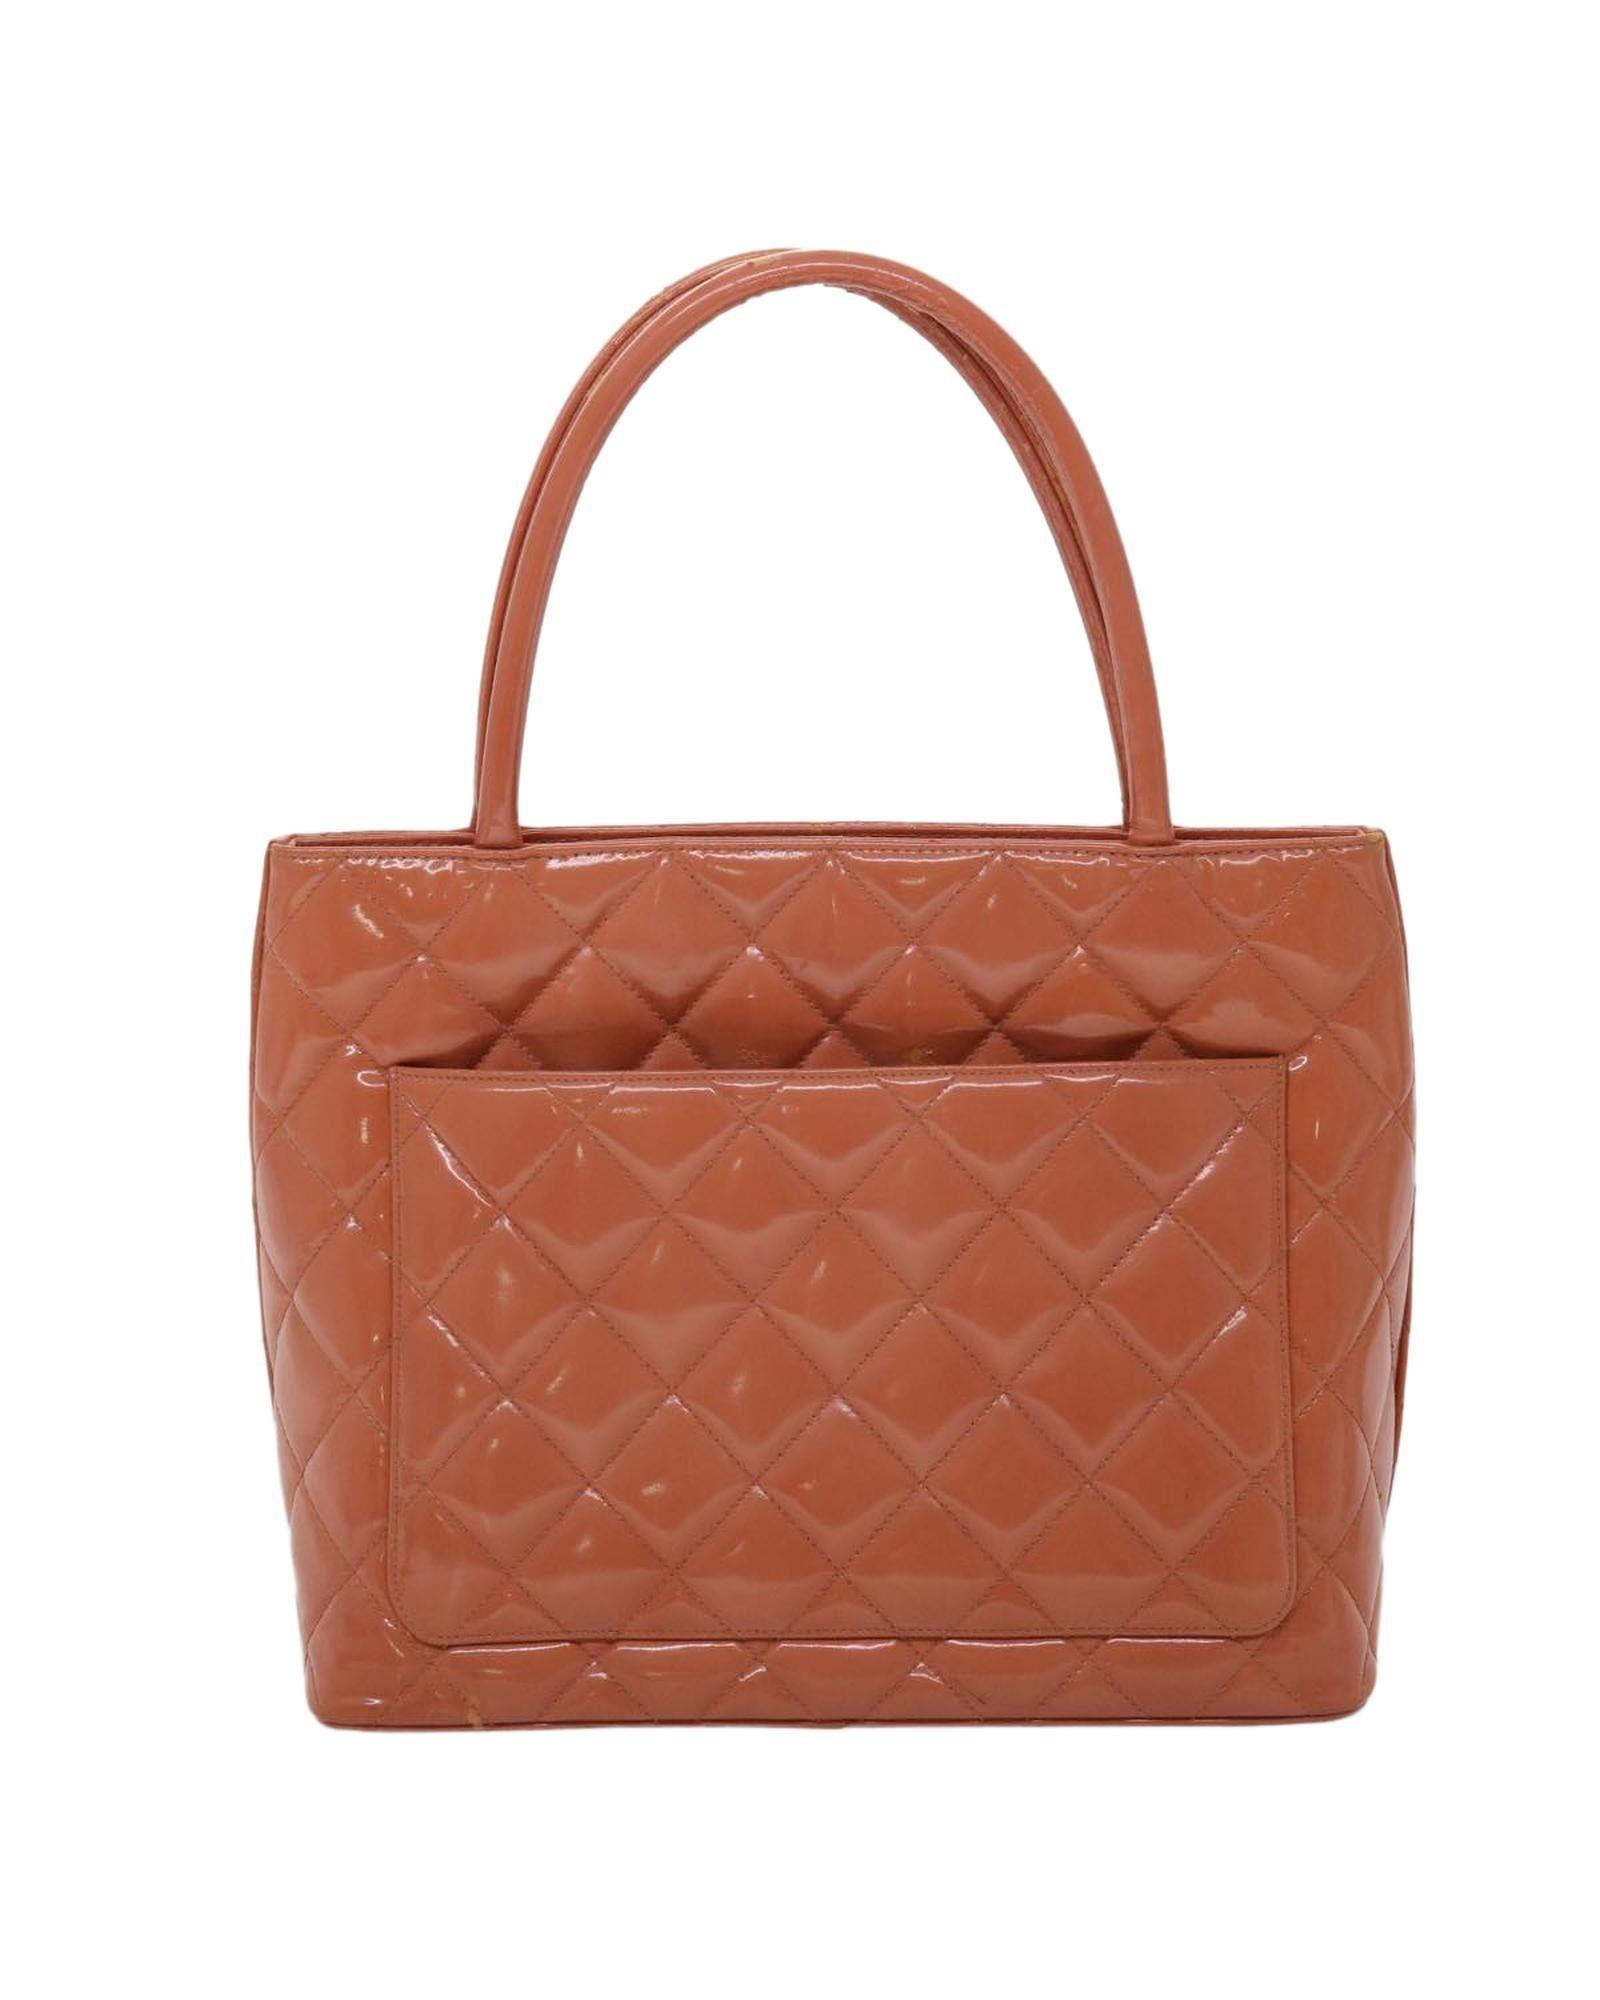 Chanel Patent Leather Tote Bag With Cc Logo in Brown